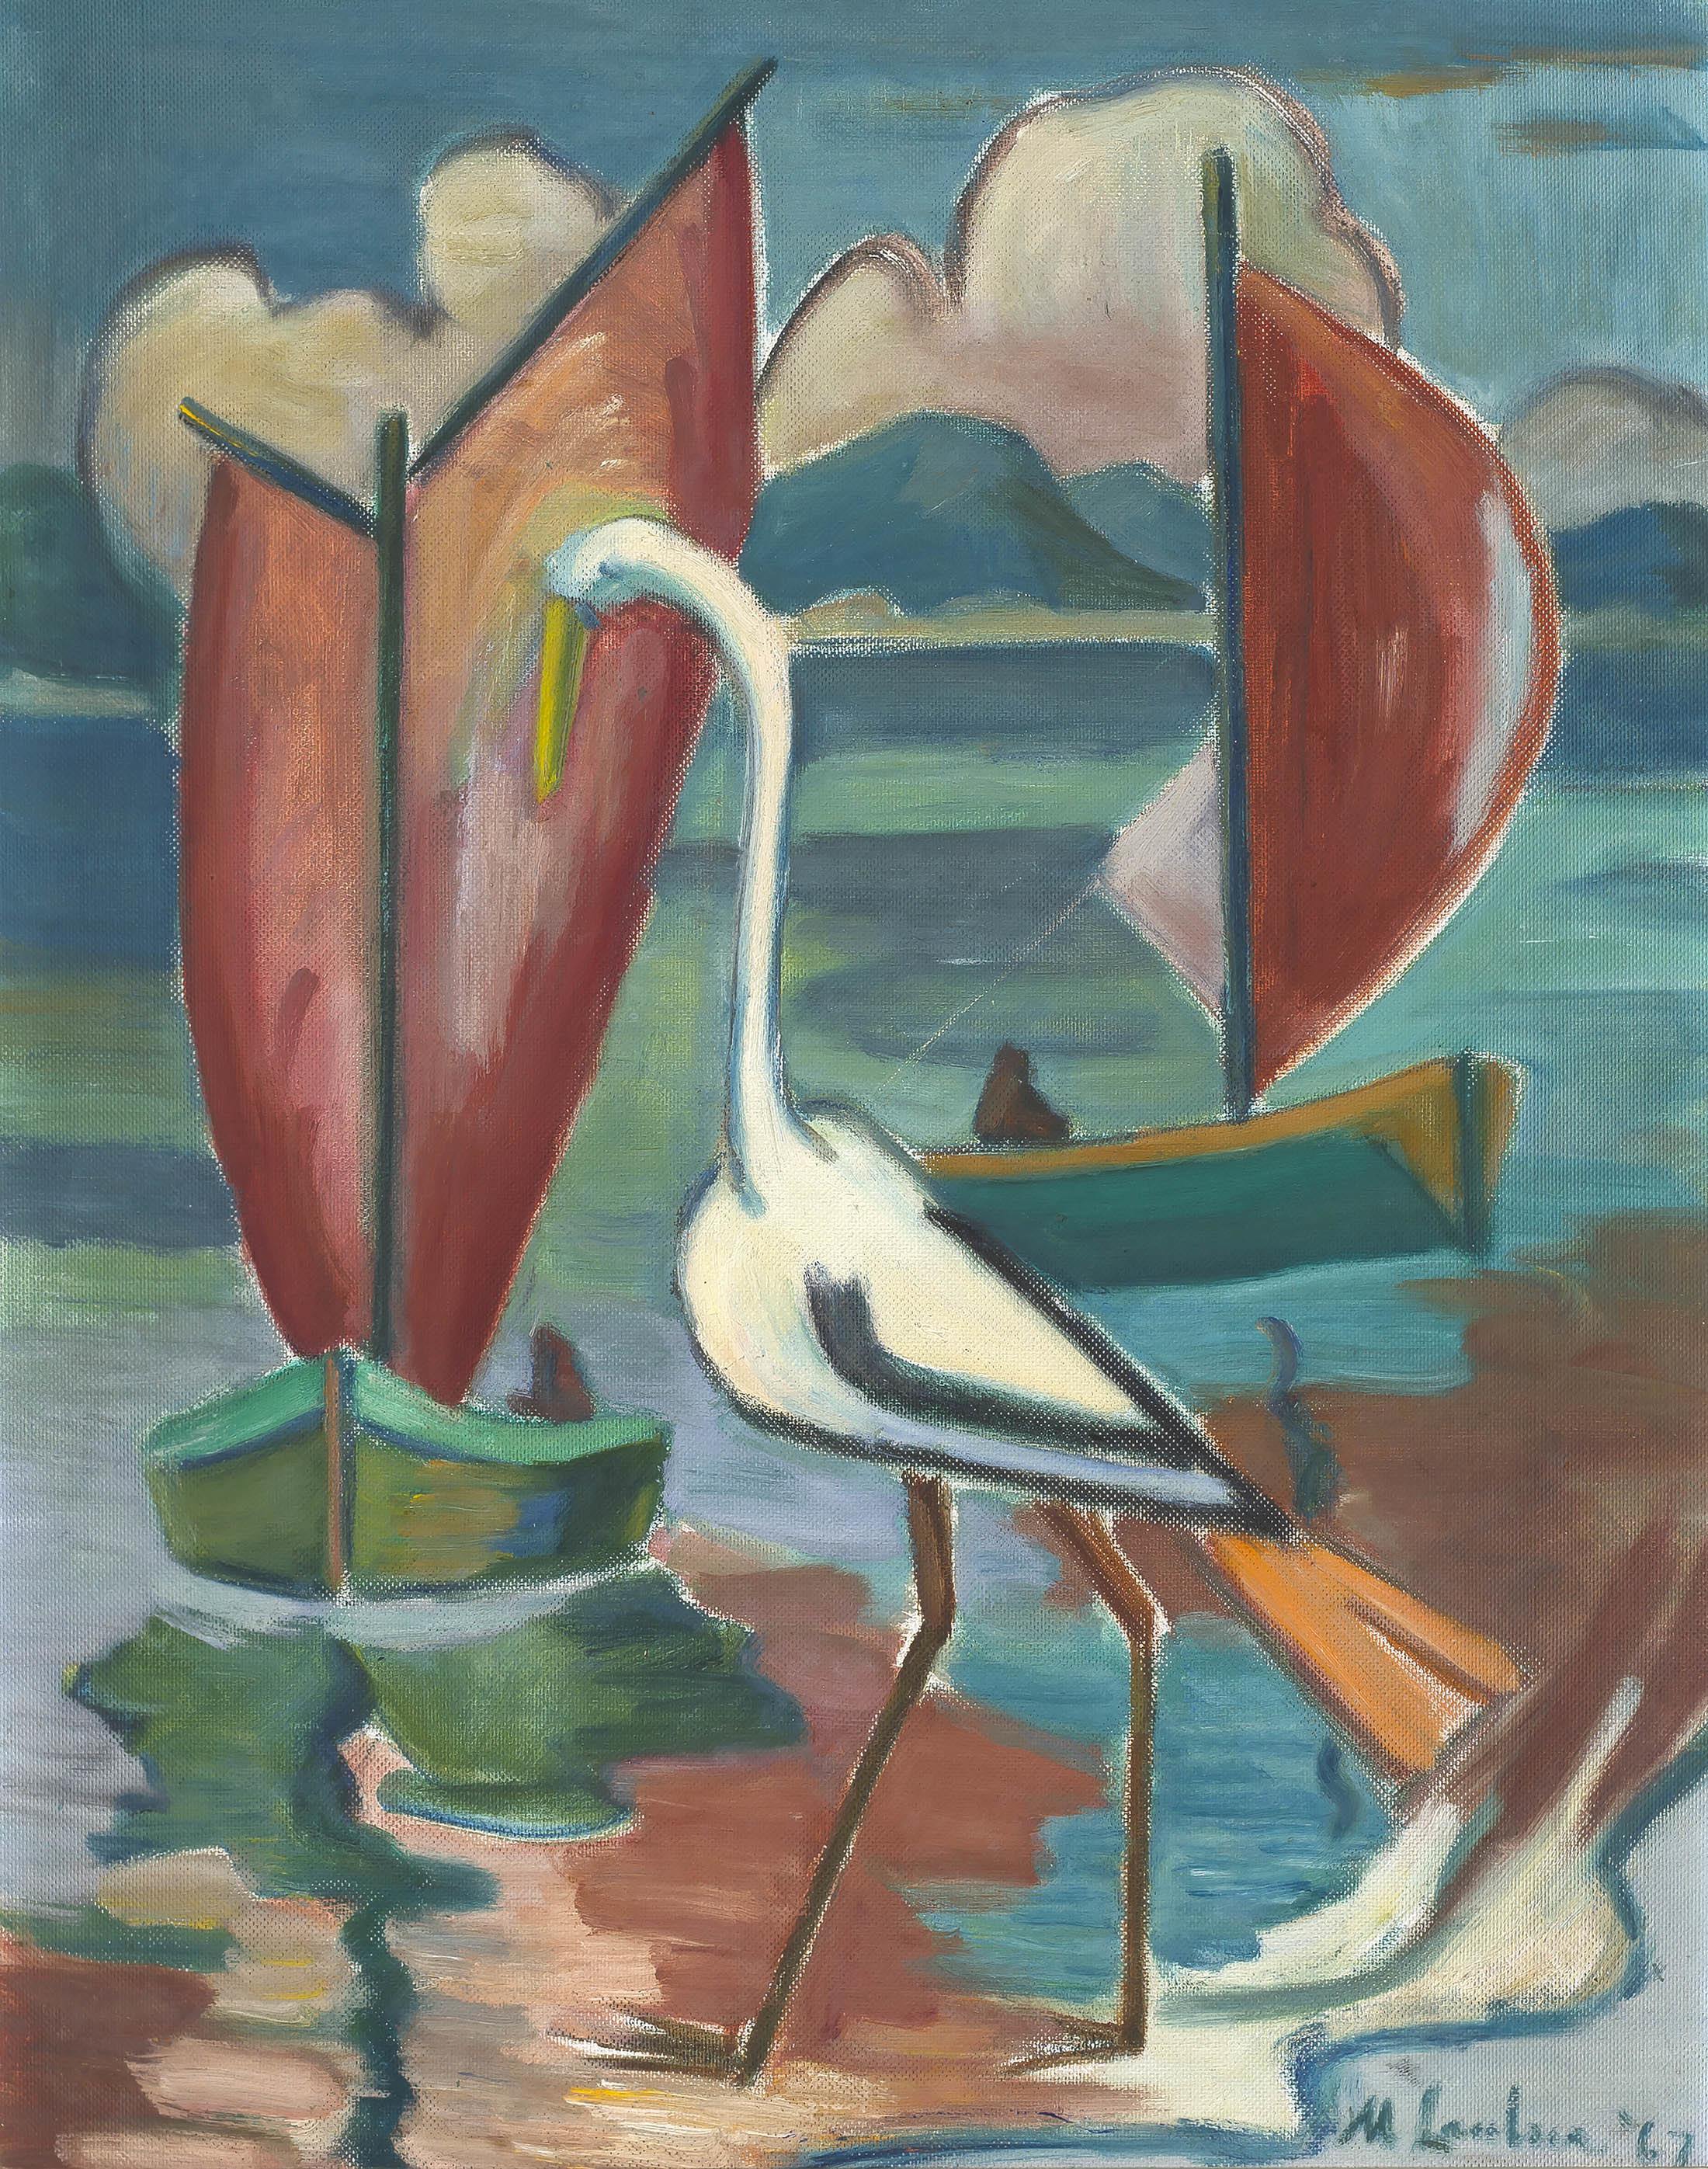 Maggie Laubser; Bird and Boats